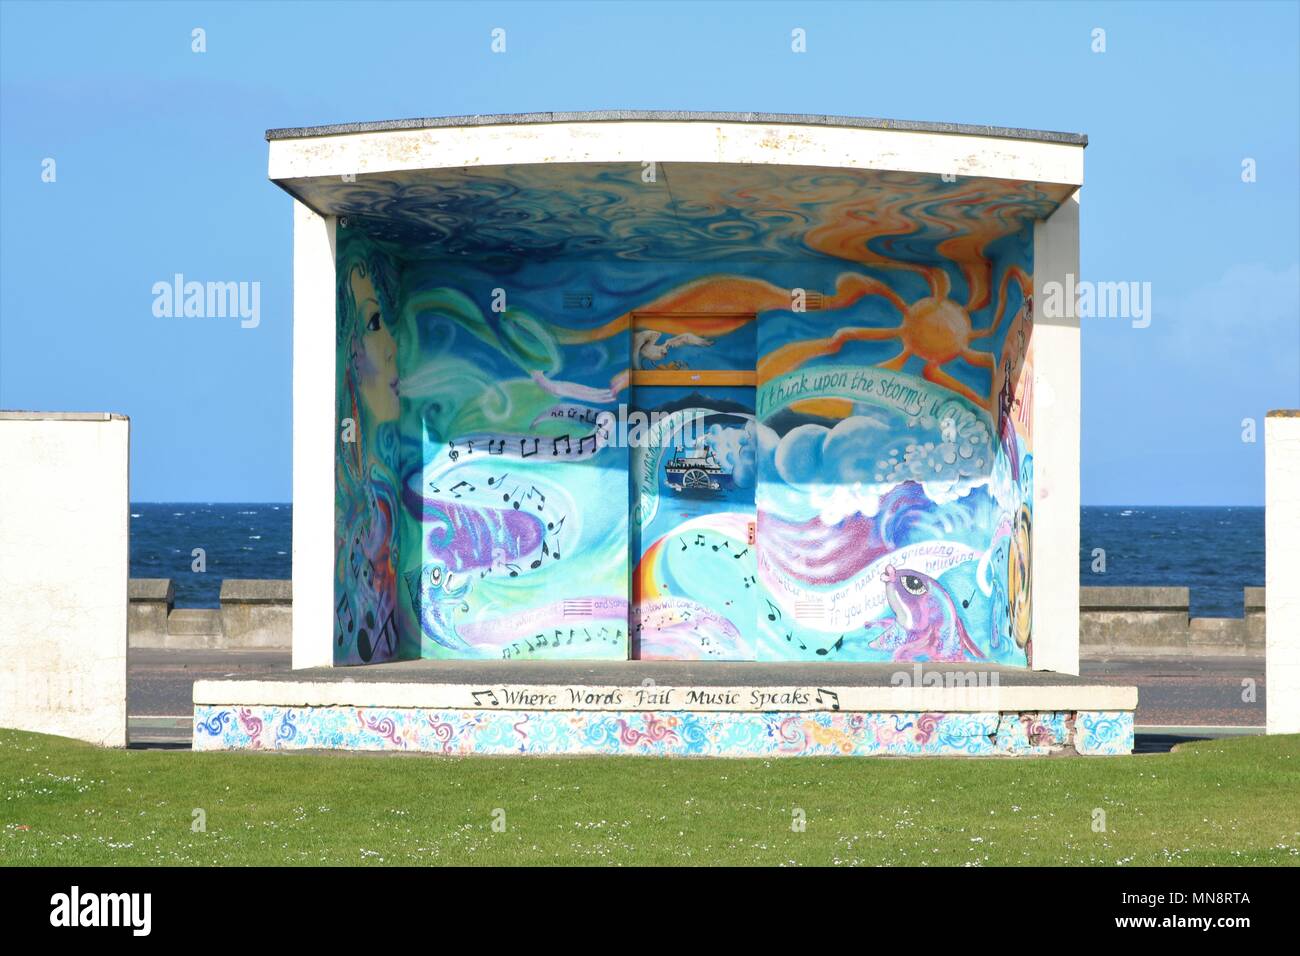 Shelter painted with art on seafront with sea in background against a blue sky at Ayr, Scotland, UK. Stock Photo